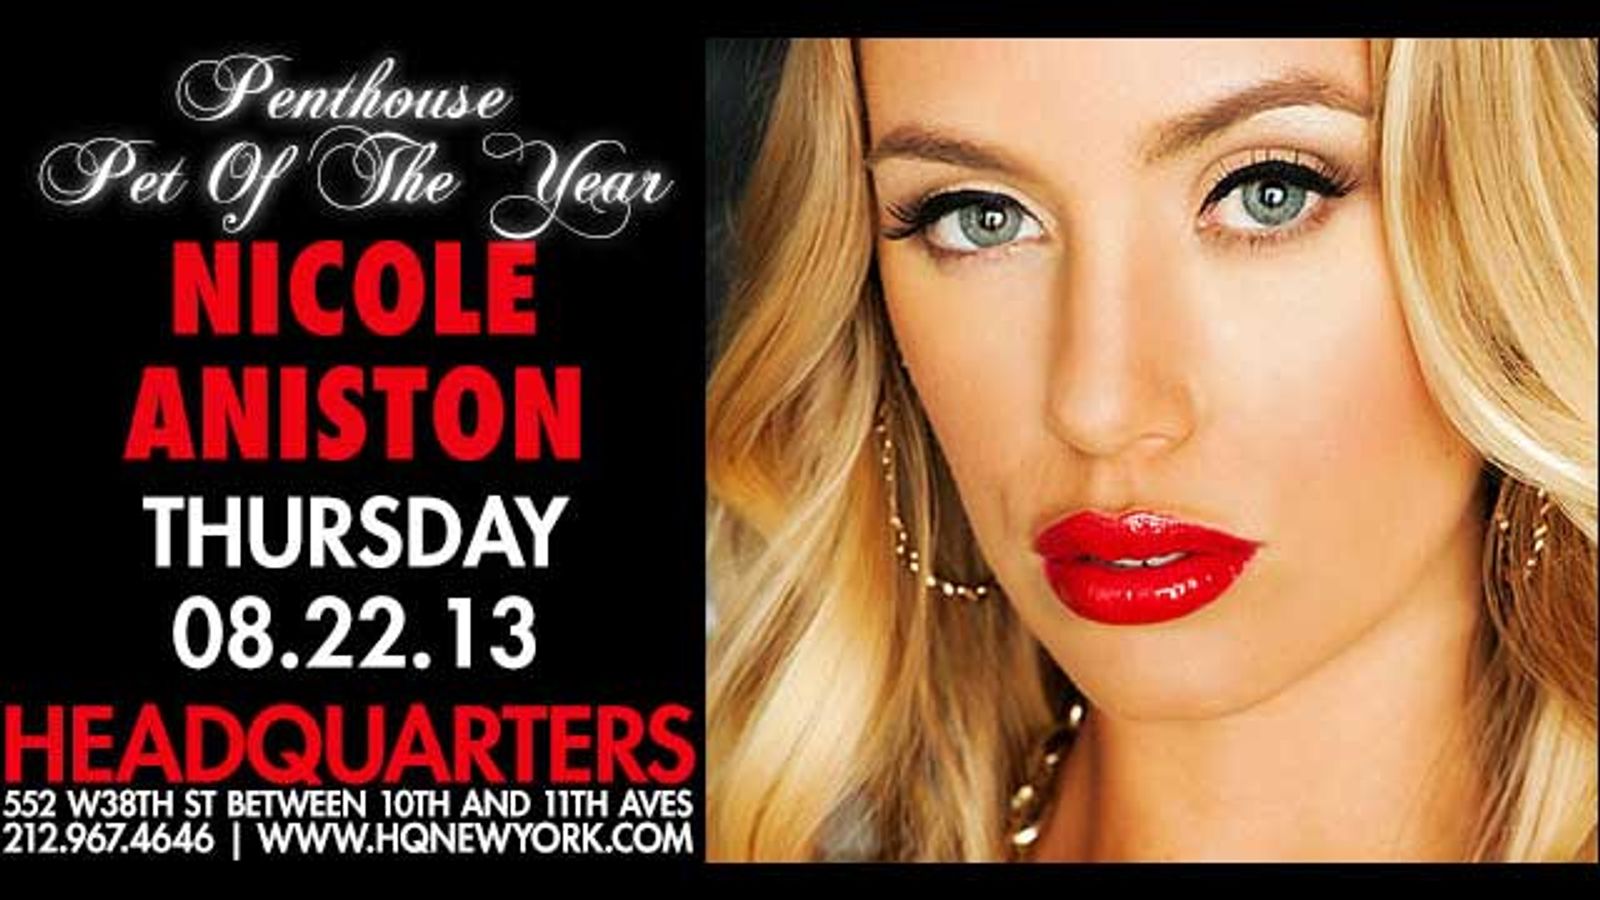 Nicole Aniston to Appear at Headquarters Gentlemen’s Club